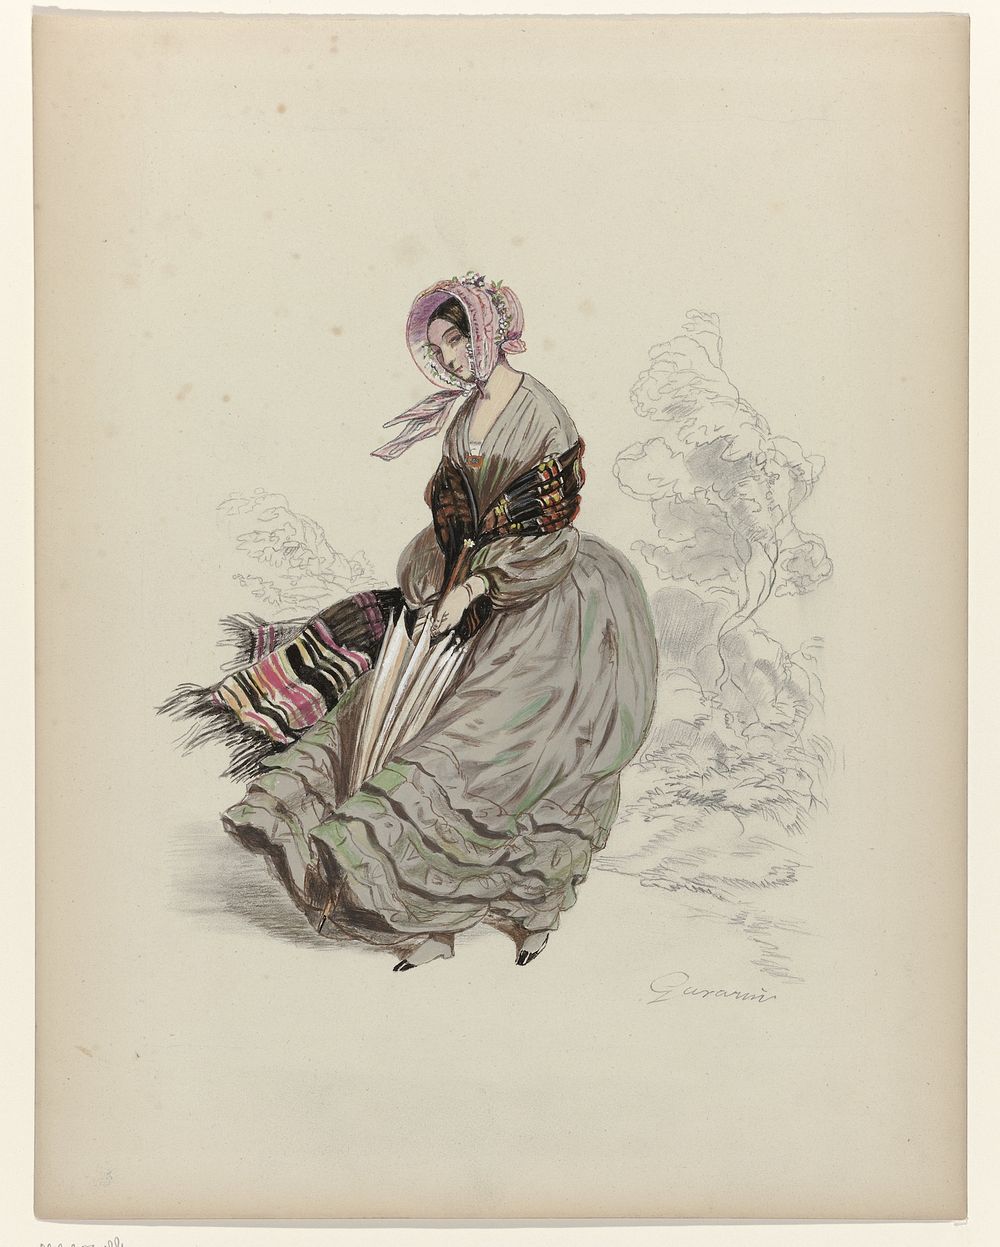 Vrouw, lopend in de wind, met parasol, 1840 (in or before 1840) by Paul Gavarni and anonymous